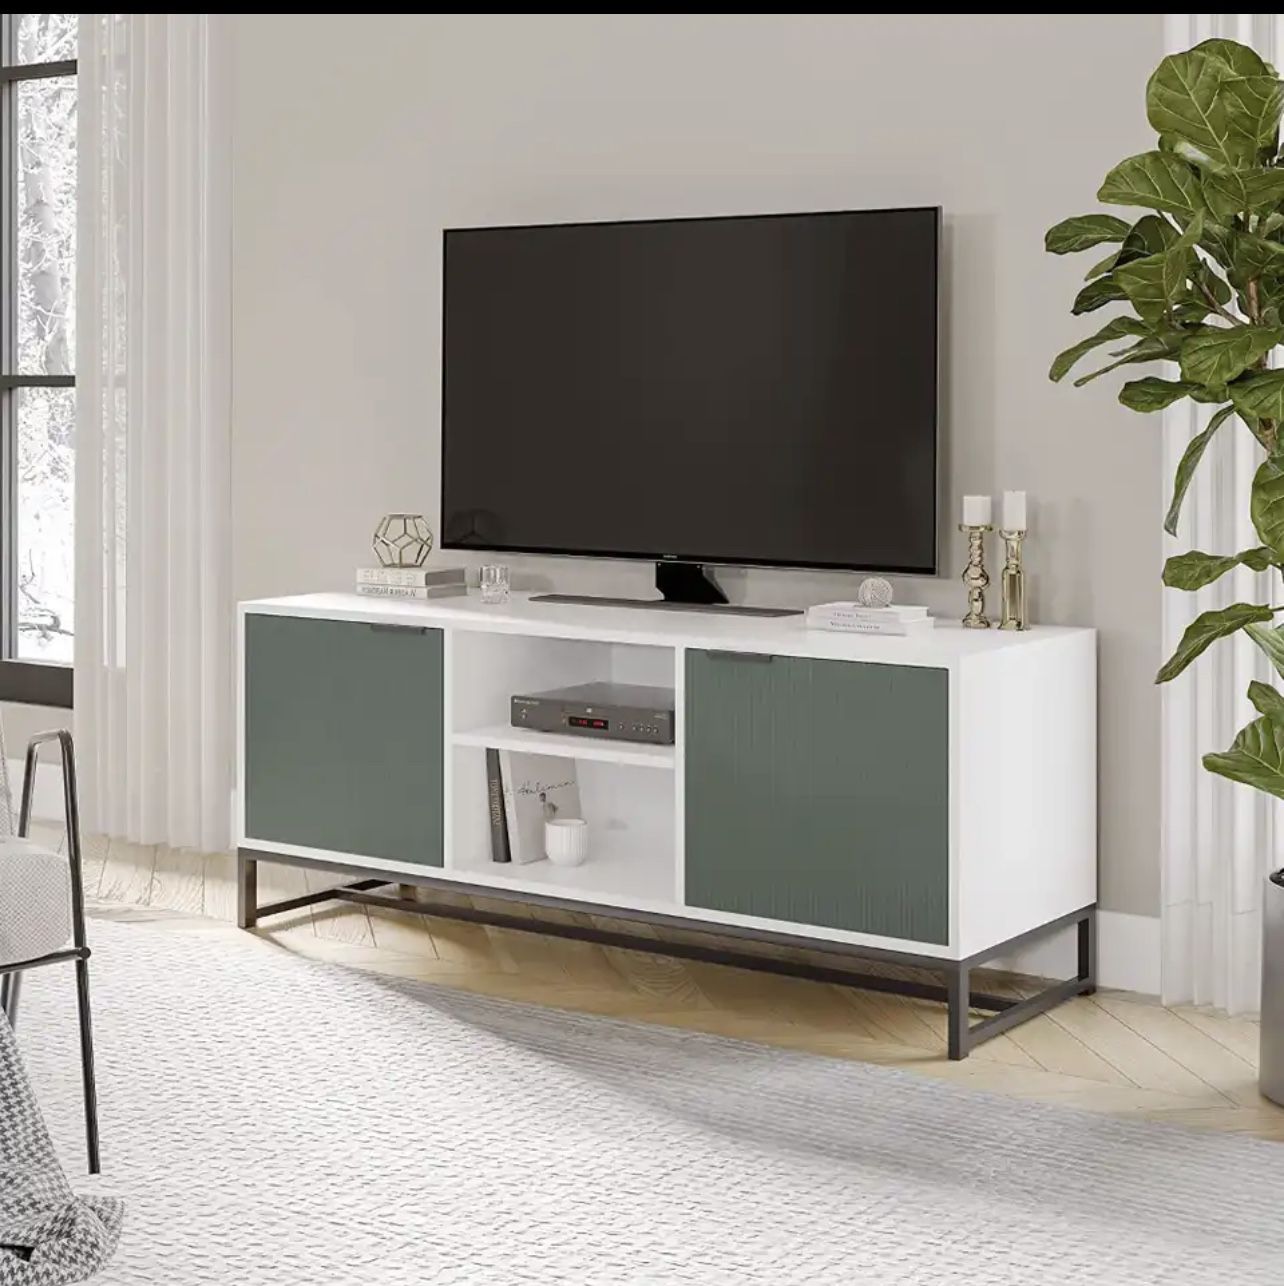  | Center for 55-inch TV with Storage Cabinet and Open Shelves for Living Room, Bedroom, Office, White and Green https://a.aliexpress.c